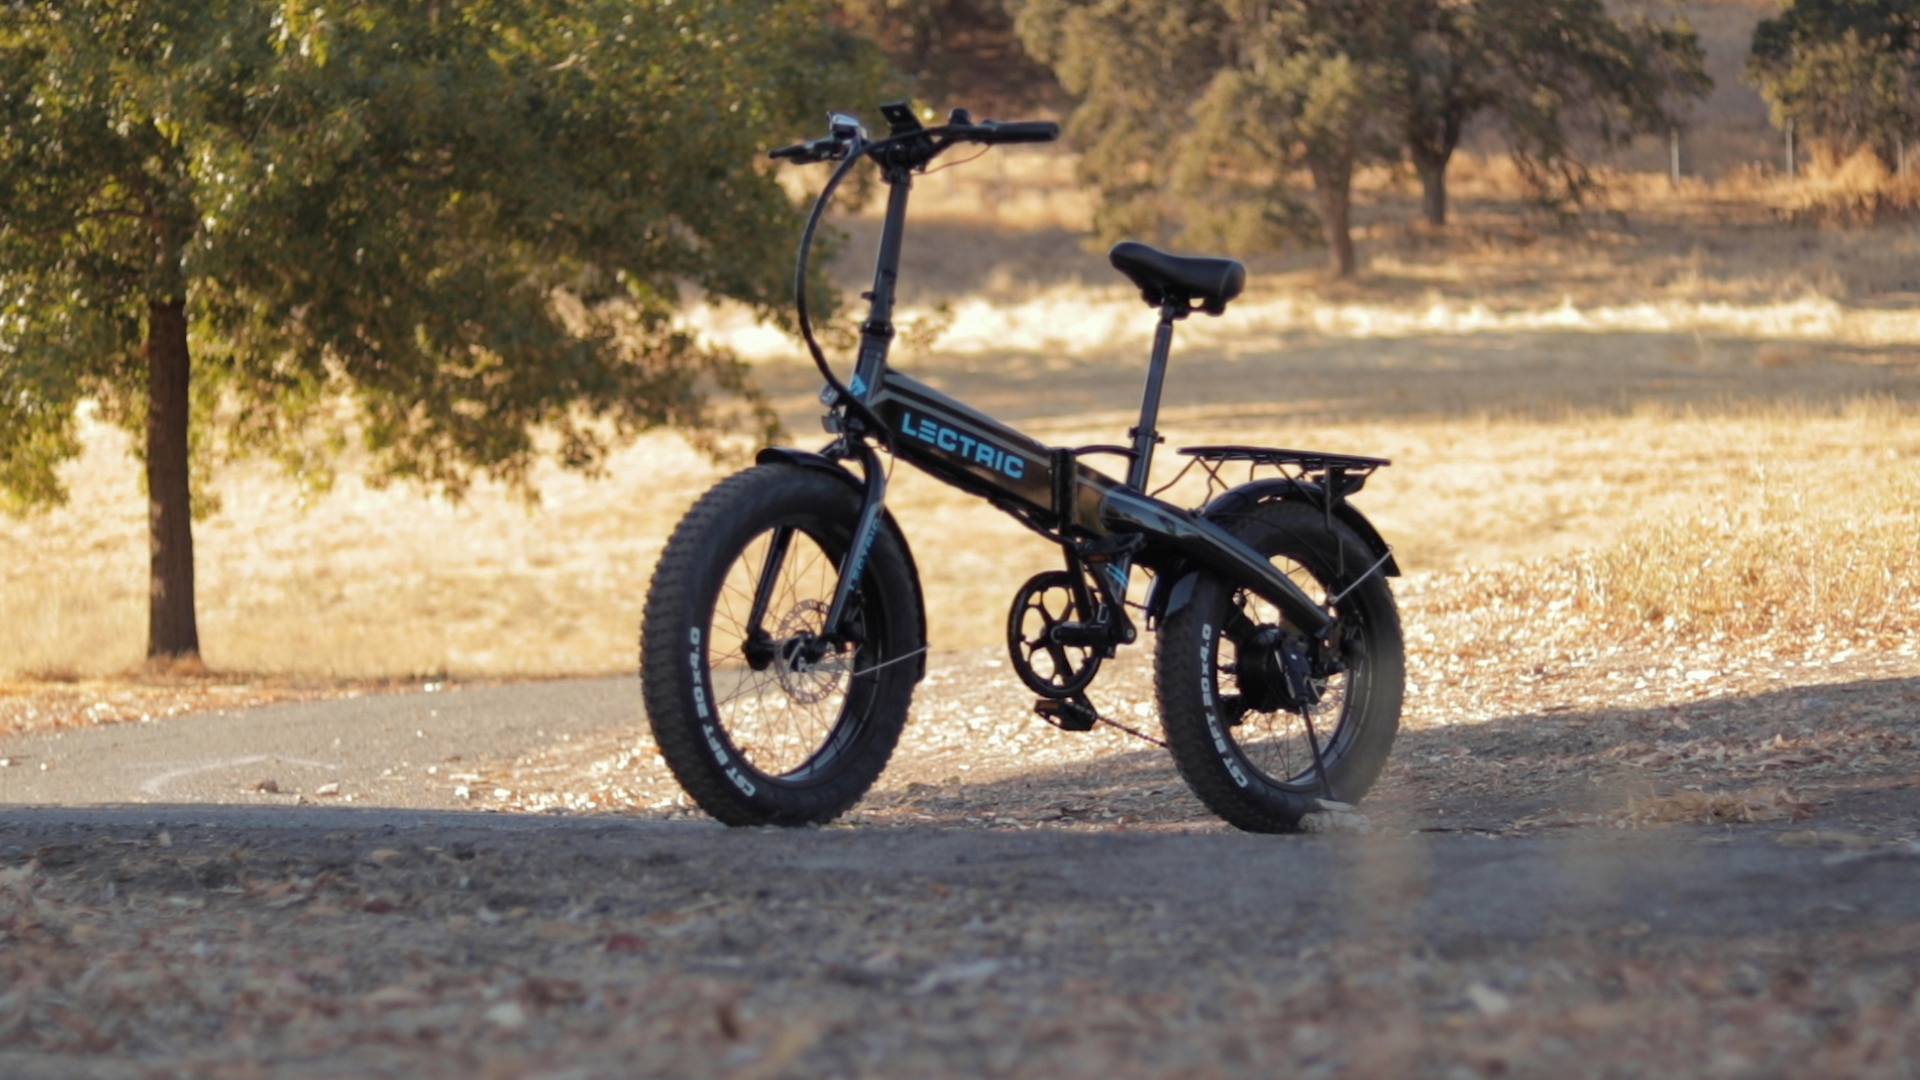 Lectric XP electric bike review: BEST FOLDING ELECTRIC BIKE UNDER $1000 ... - ElectrifieD Reviews Lectric Xp Electric Bike Review Profile